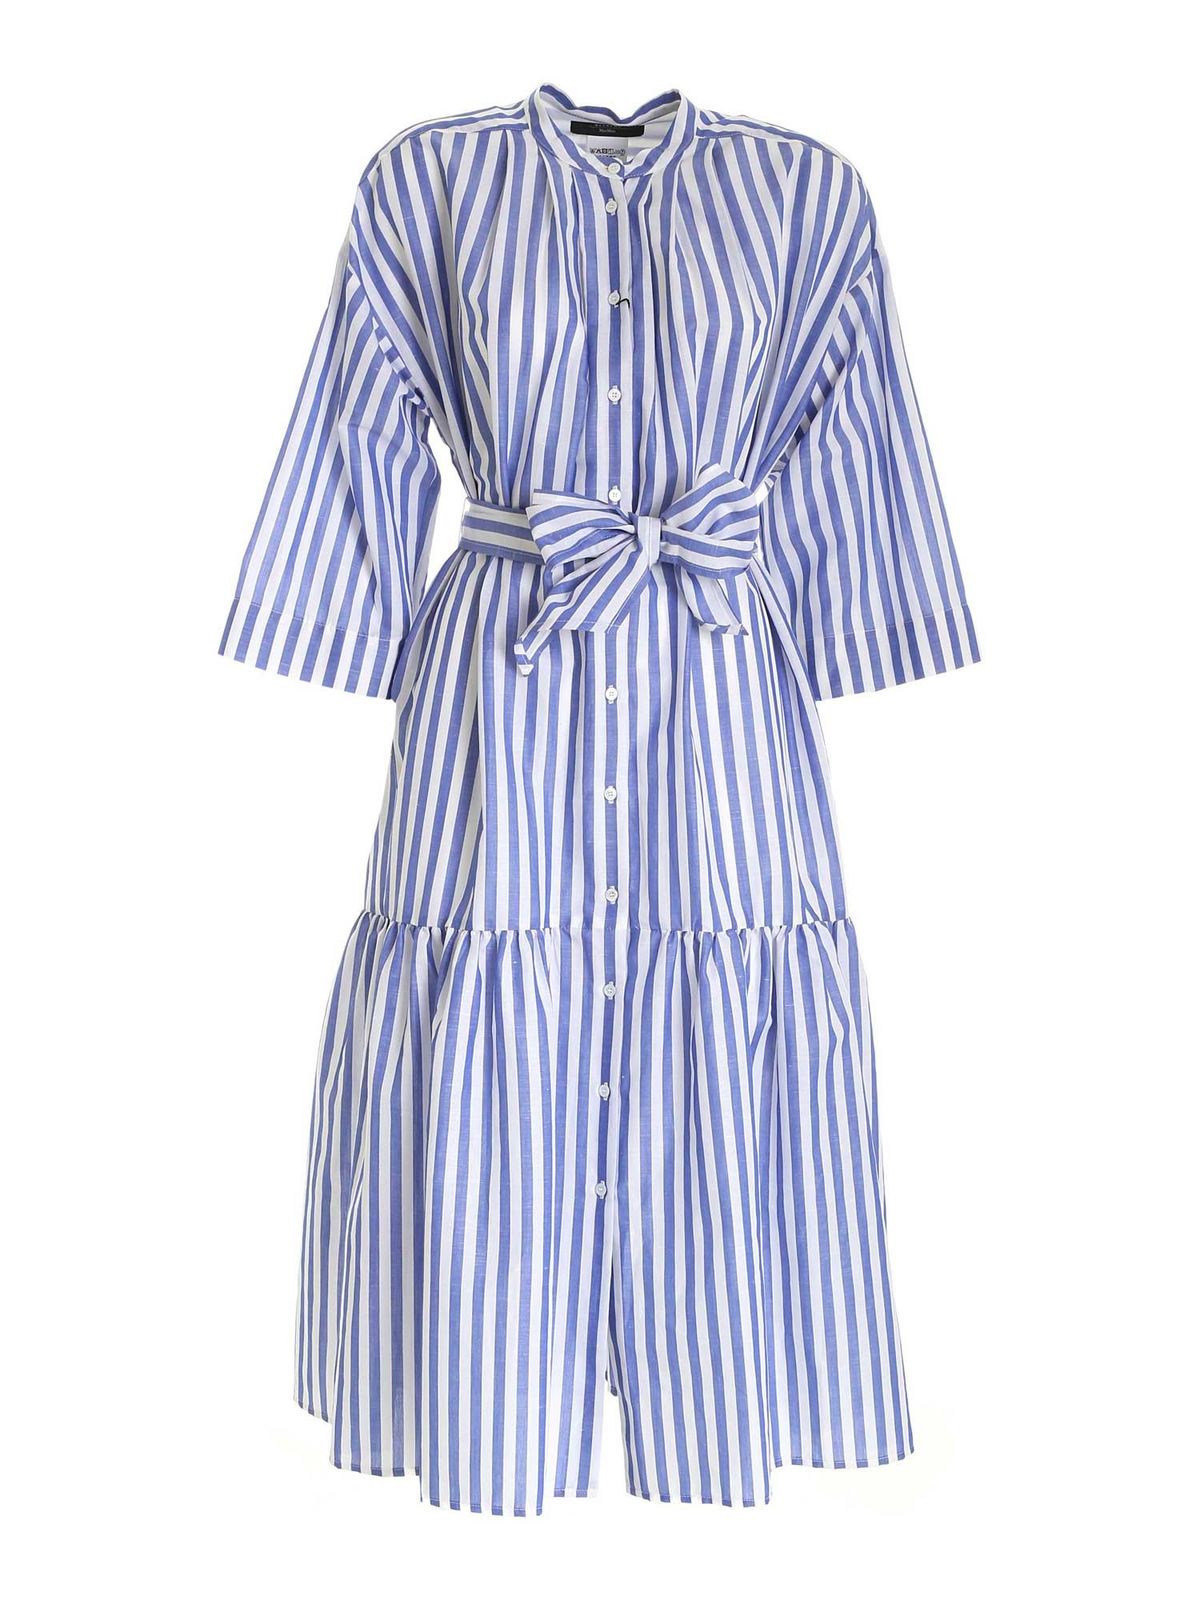 Weekend Max Mara Verres Stripes Dress In White And Blue | ModeSens